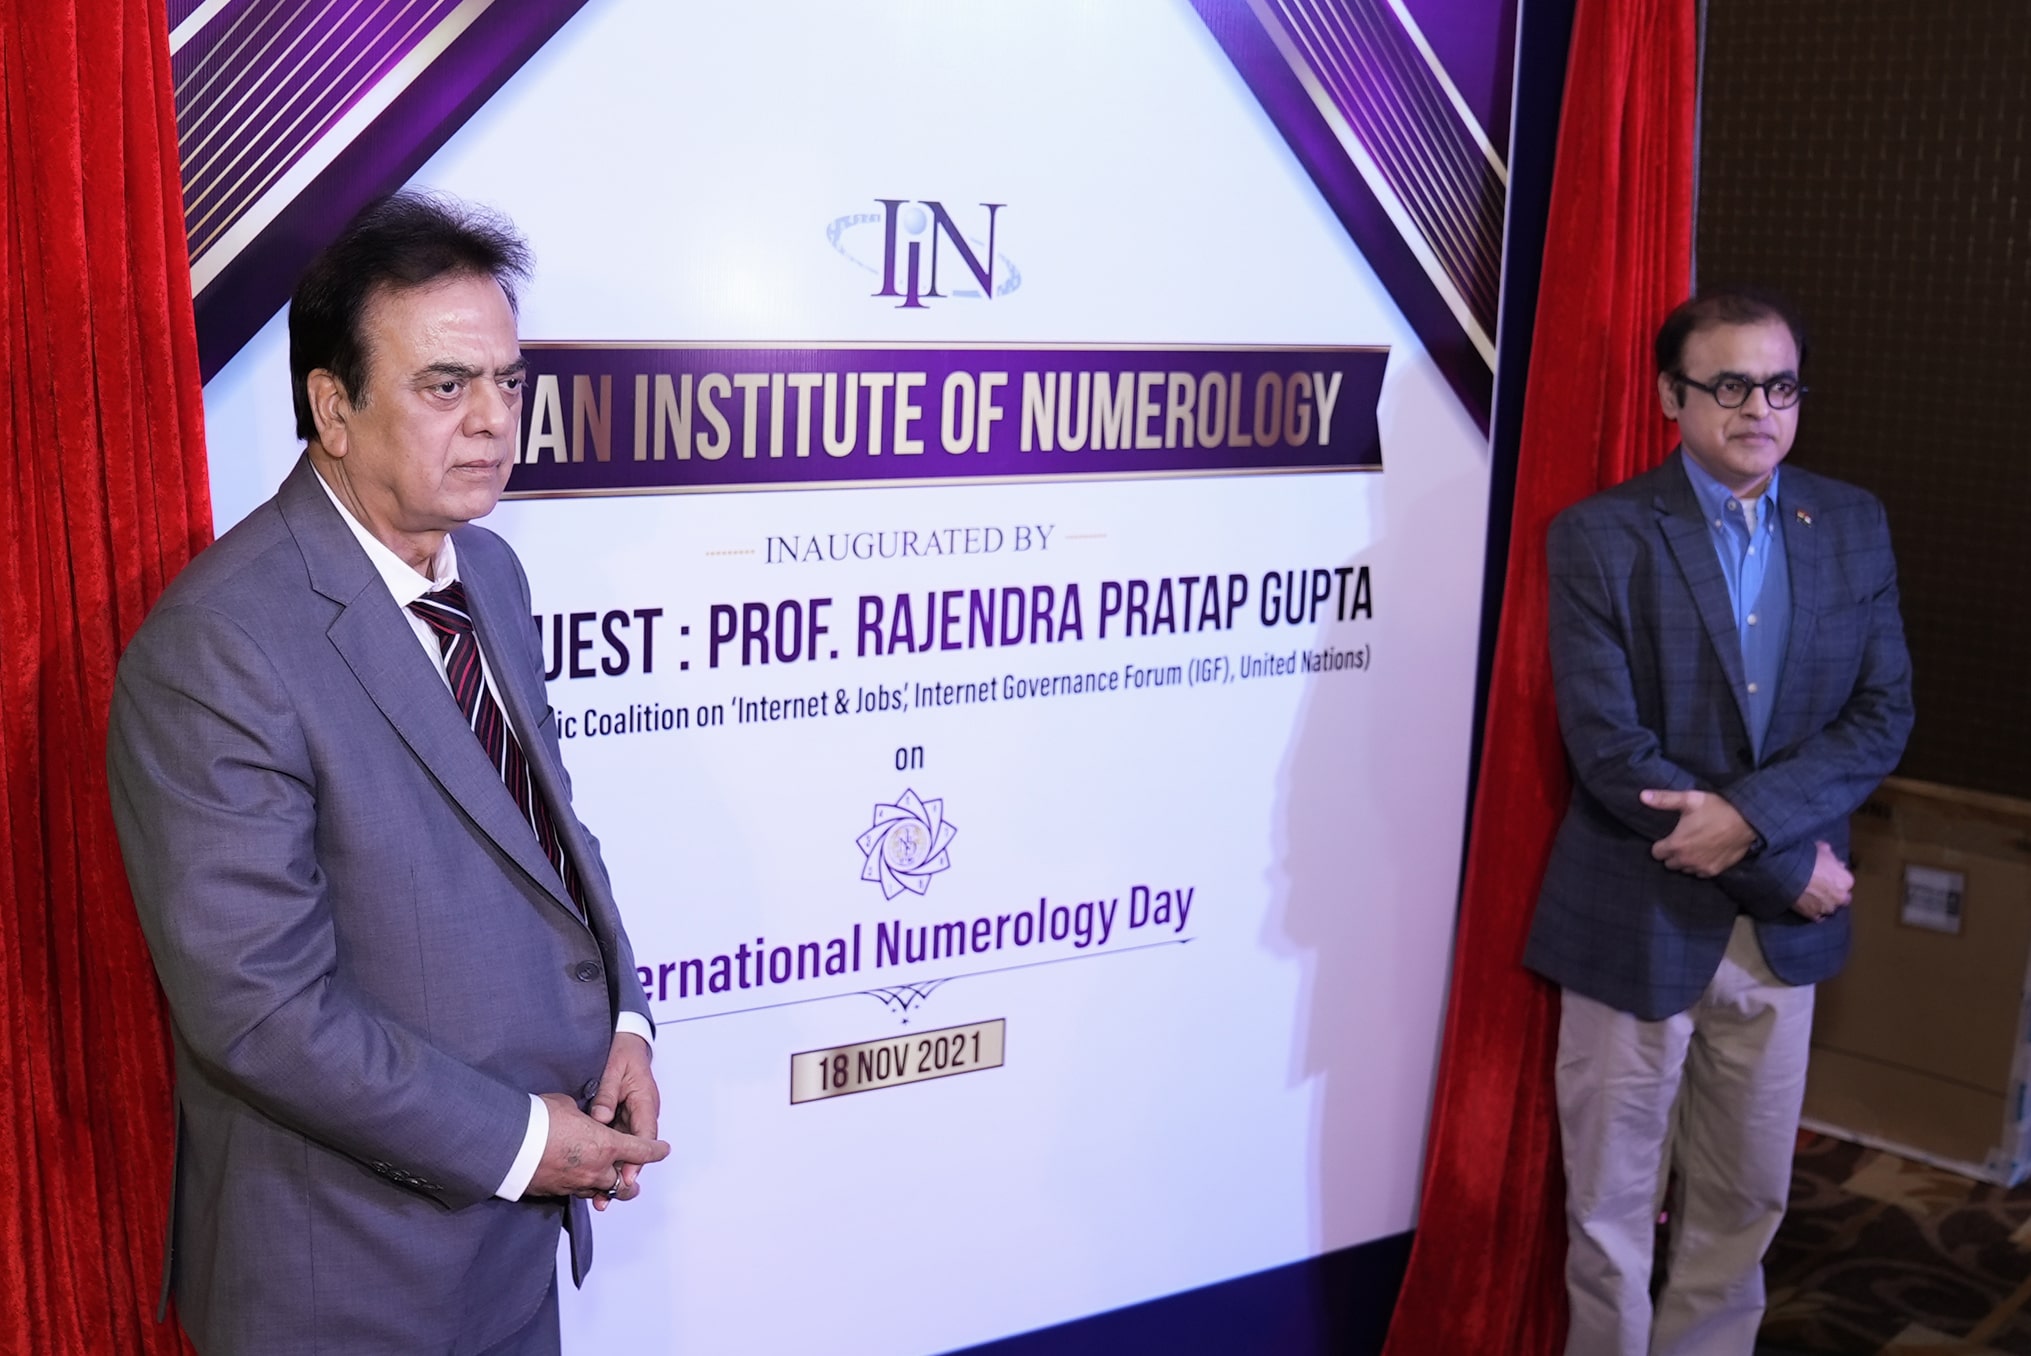 Founded  Indian Institute of Numerology (IIN) and International Numerology Forum (INF)